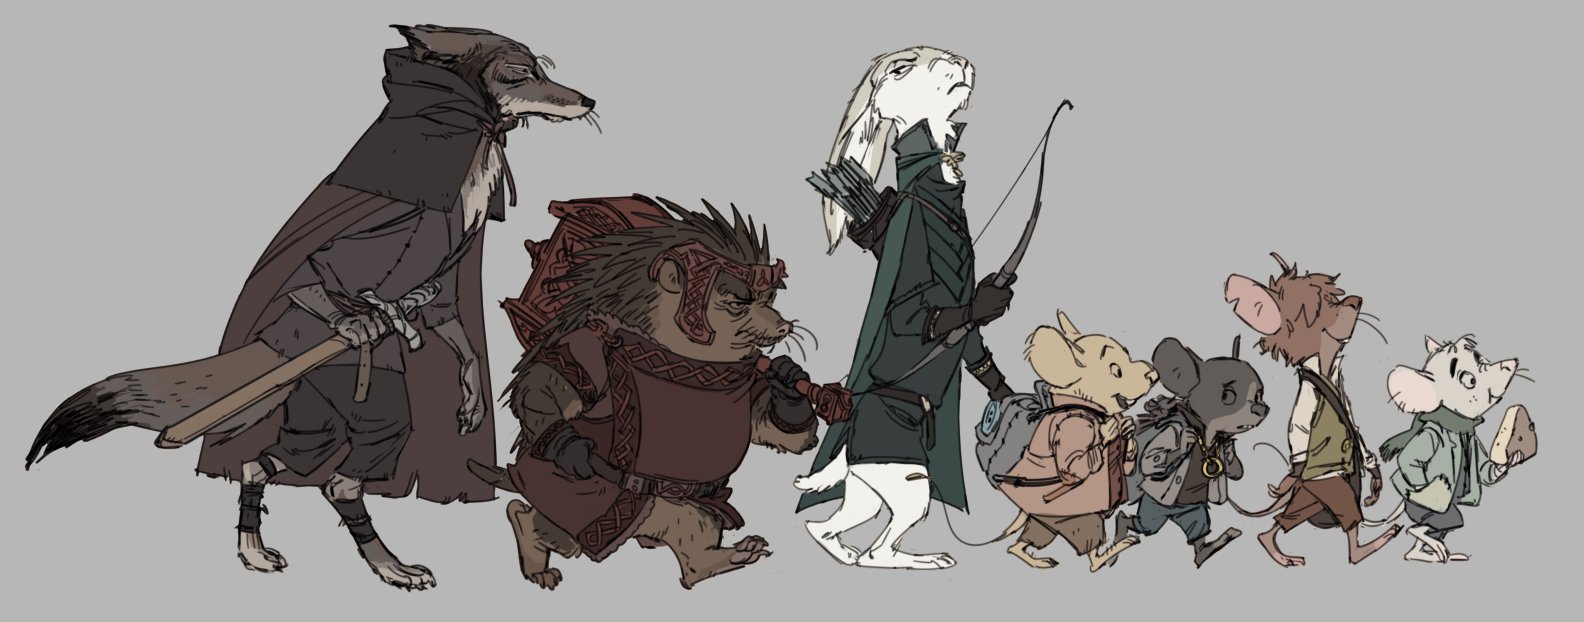 Lord of the Rings With Little Animals Fan Art